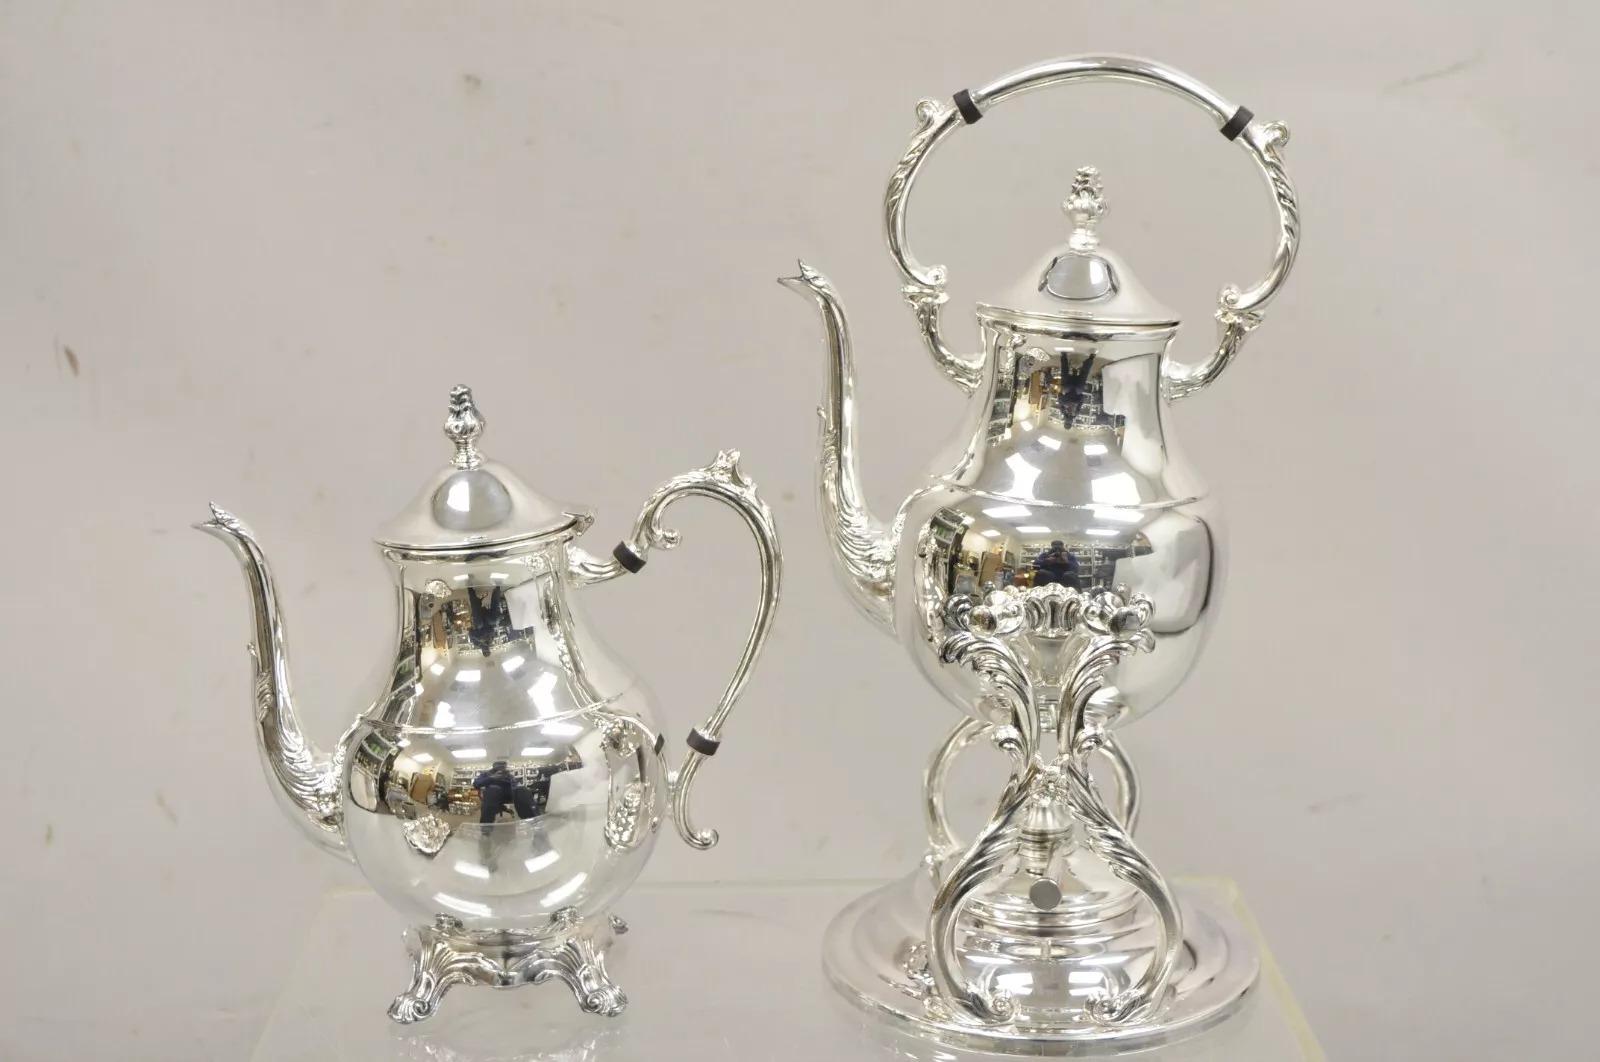 Vintage FB Rogers Victorian Silver Plated Tea Set with Tilting Pot - 6 Pc Set For Sale 3